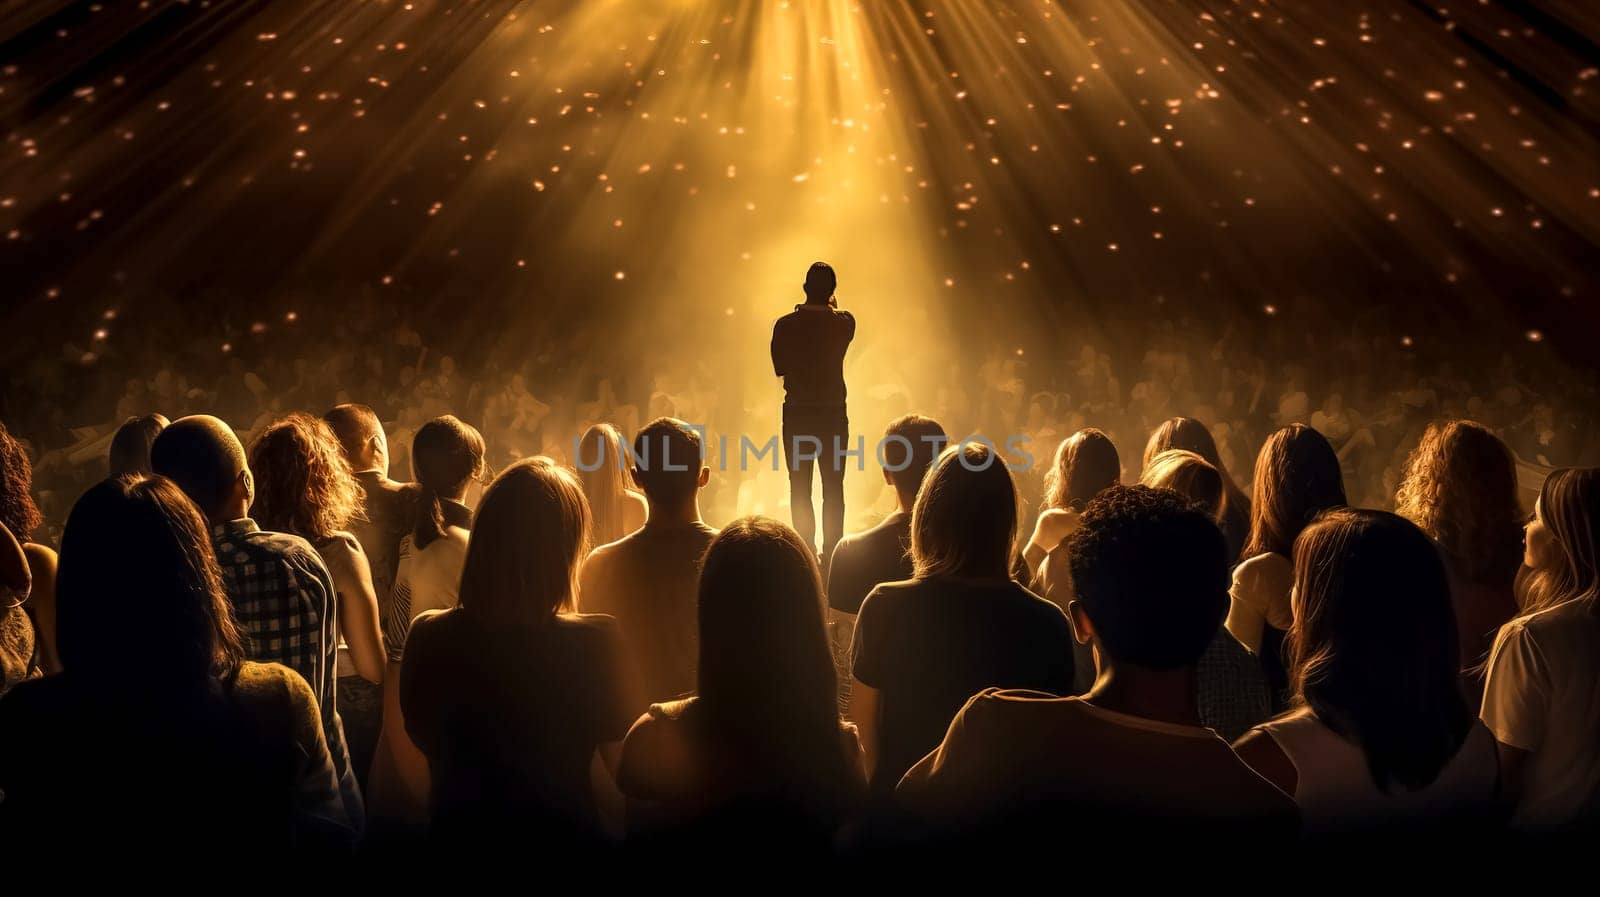 speaker standing confidently on stage, basked in dramatic stage lighting, addressing an attentive audience.